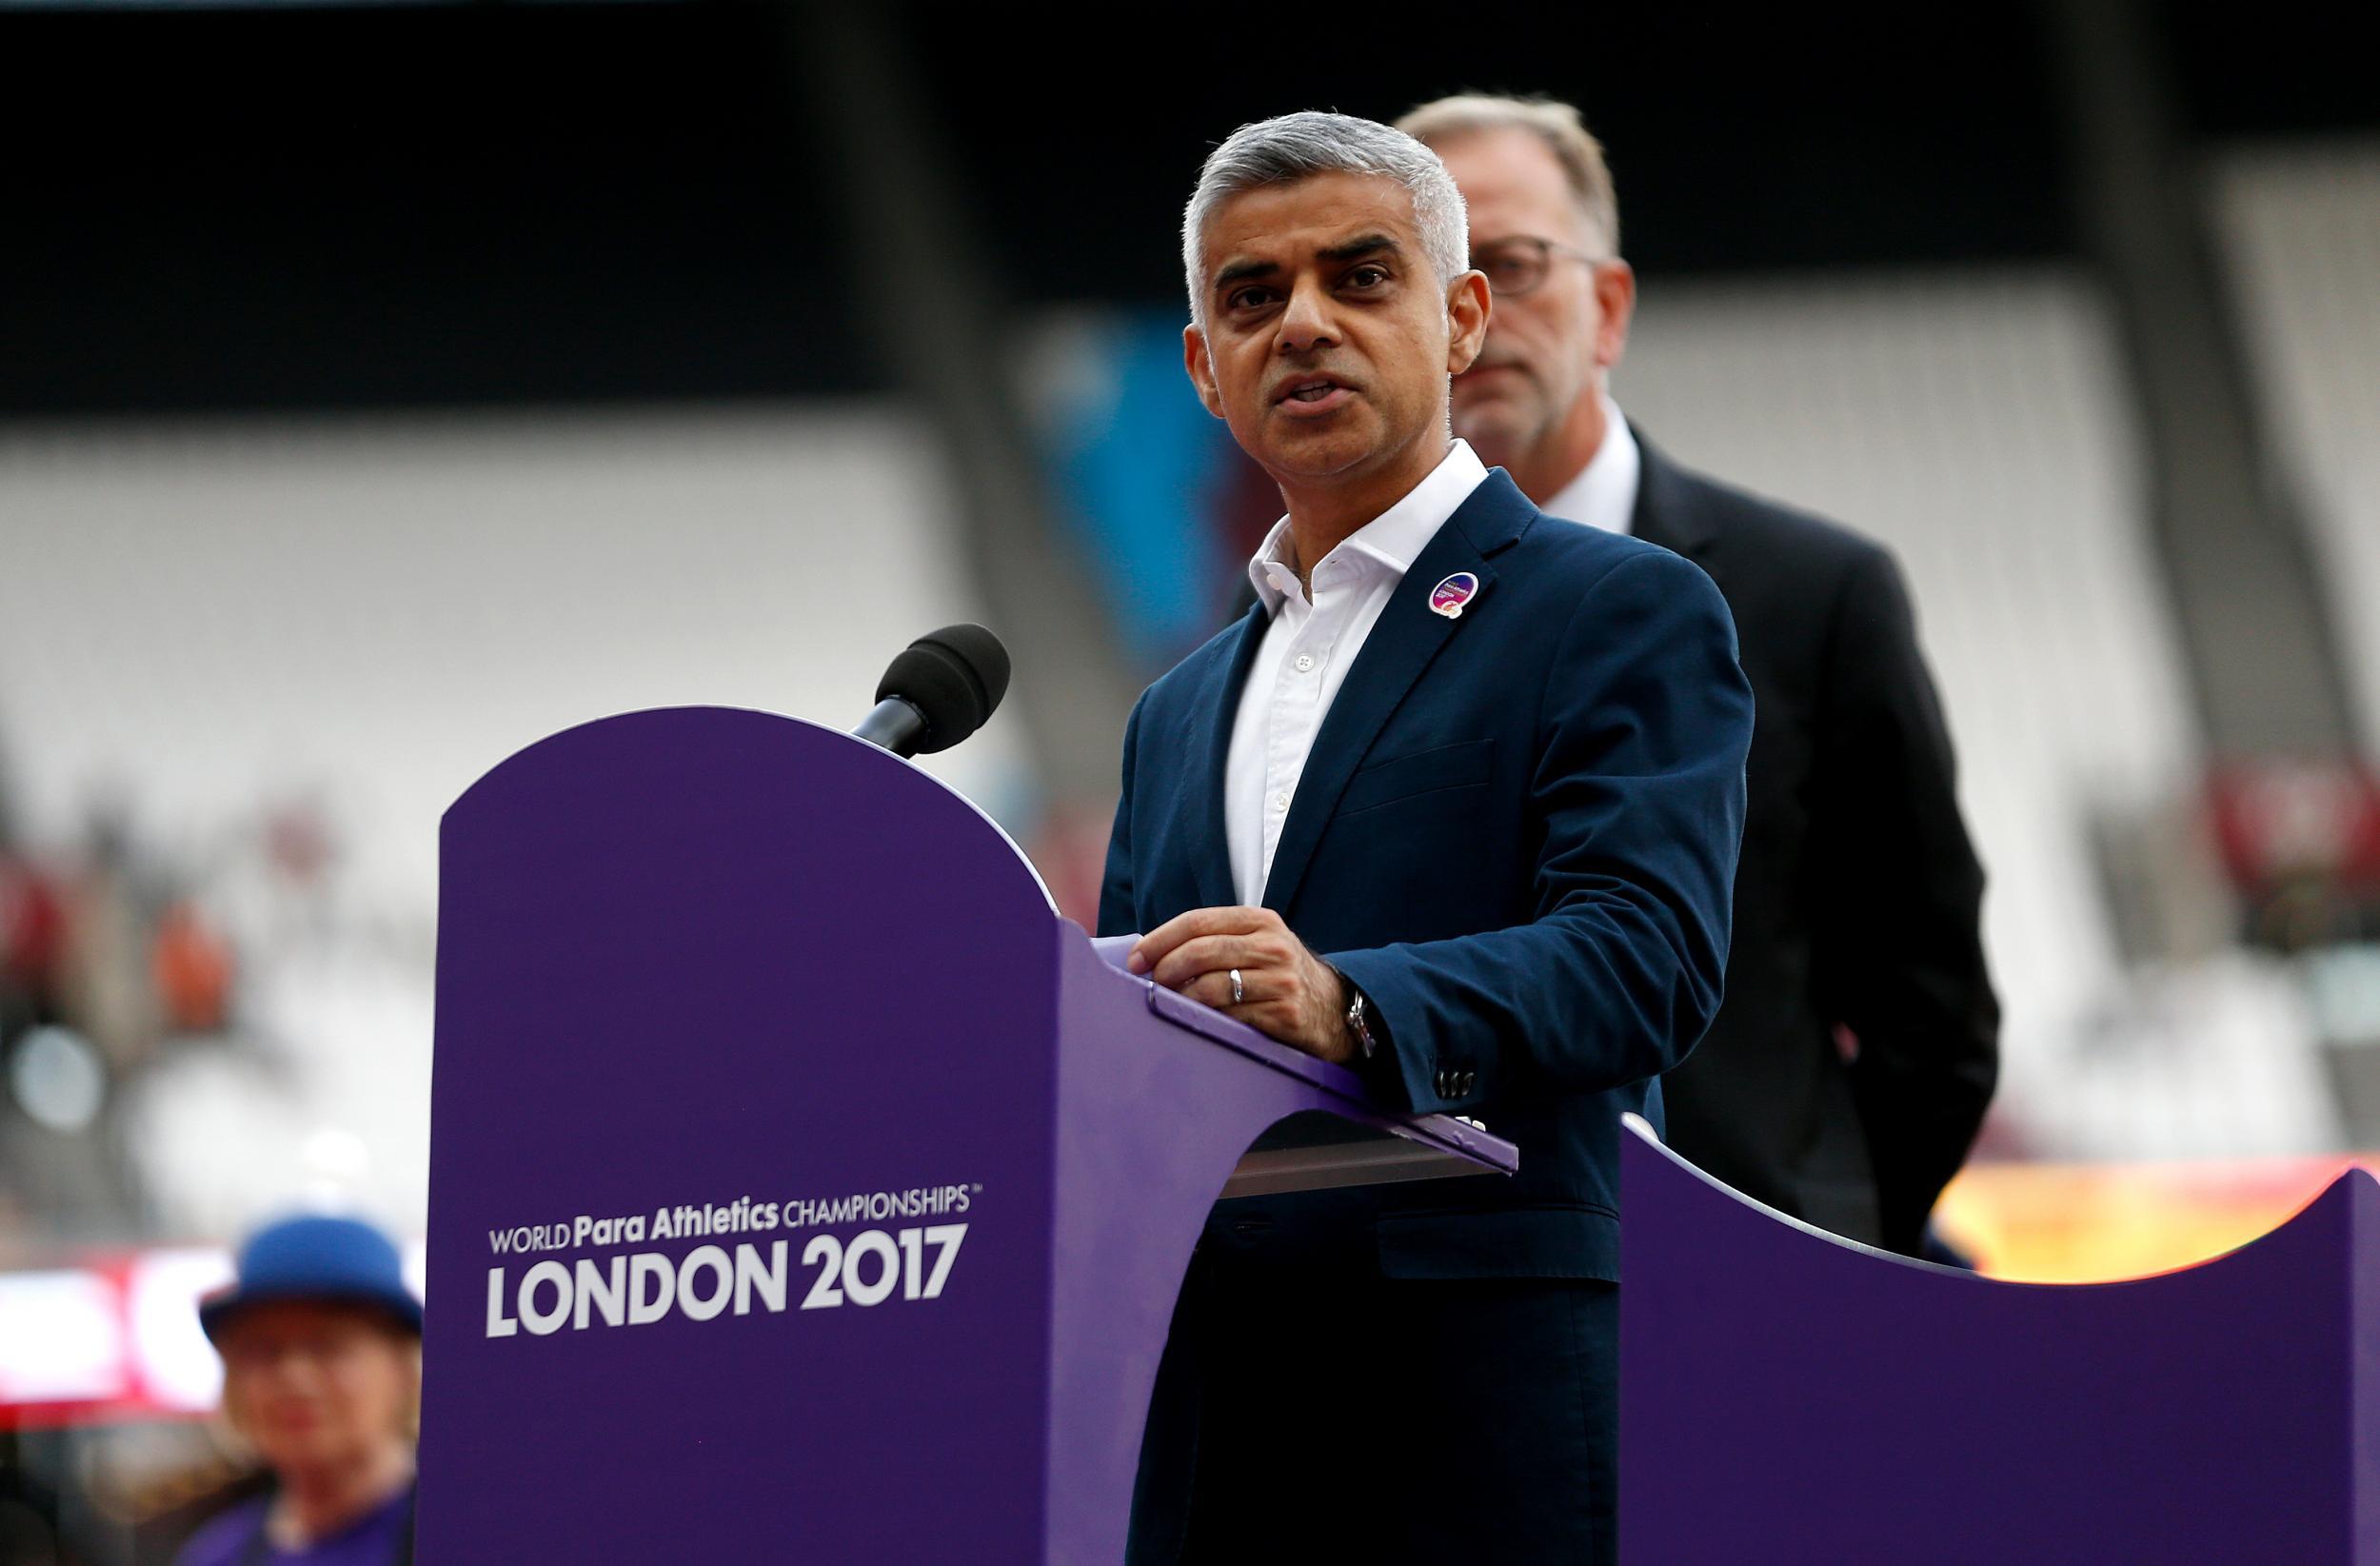 Sadiq Khan praised the openness of London and said it was welcoming to all